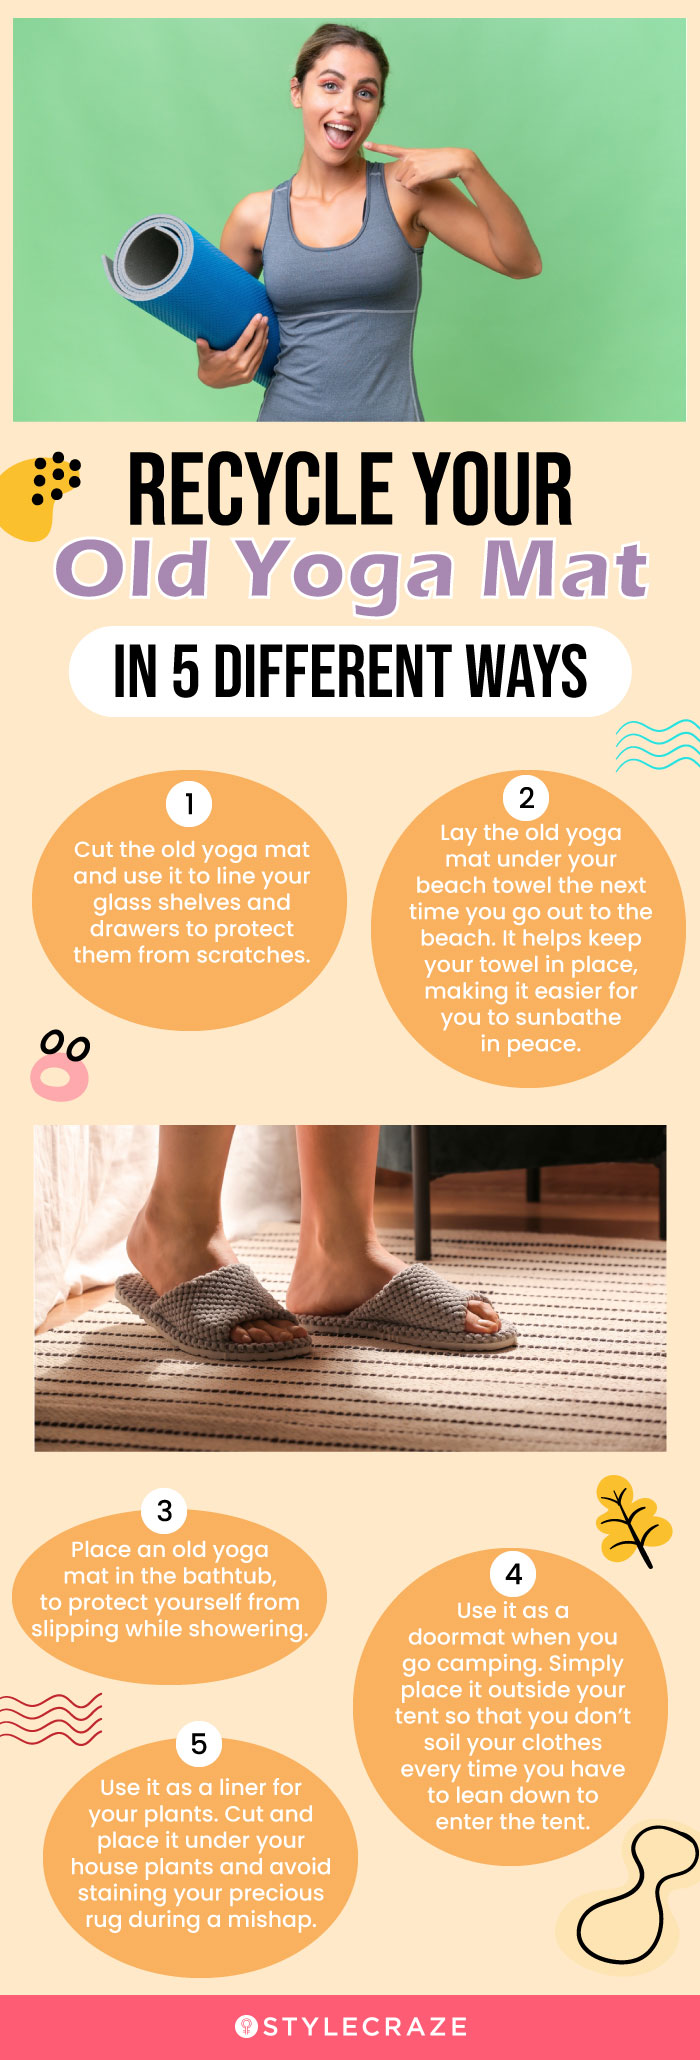 Recycle Your Old Yoga Mat In 5 Different Ways (infographic)